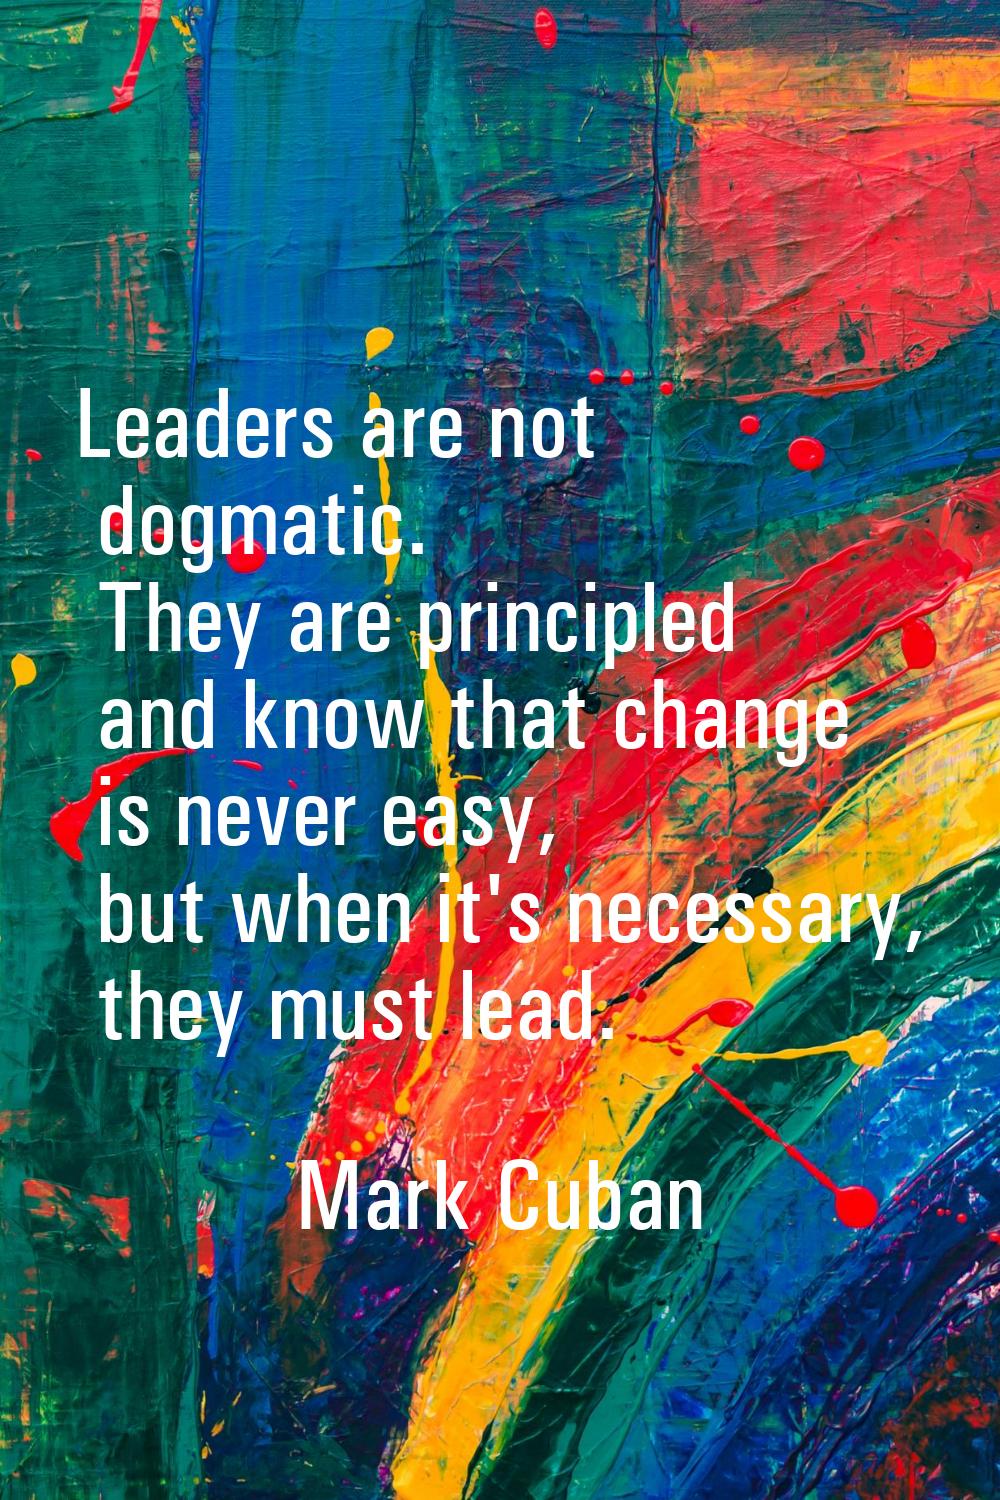 Leaders are not dogmatic. They are principled and know that change is never easy, but when it's nec